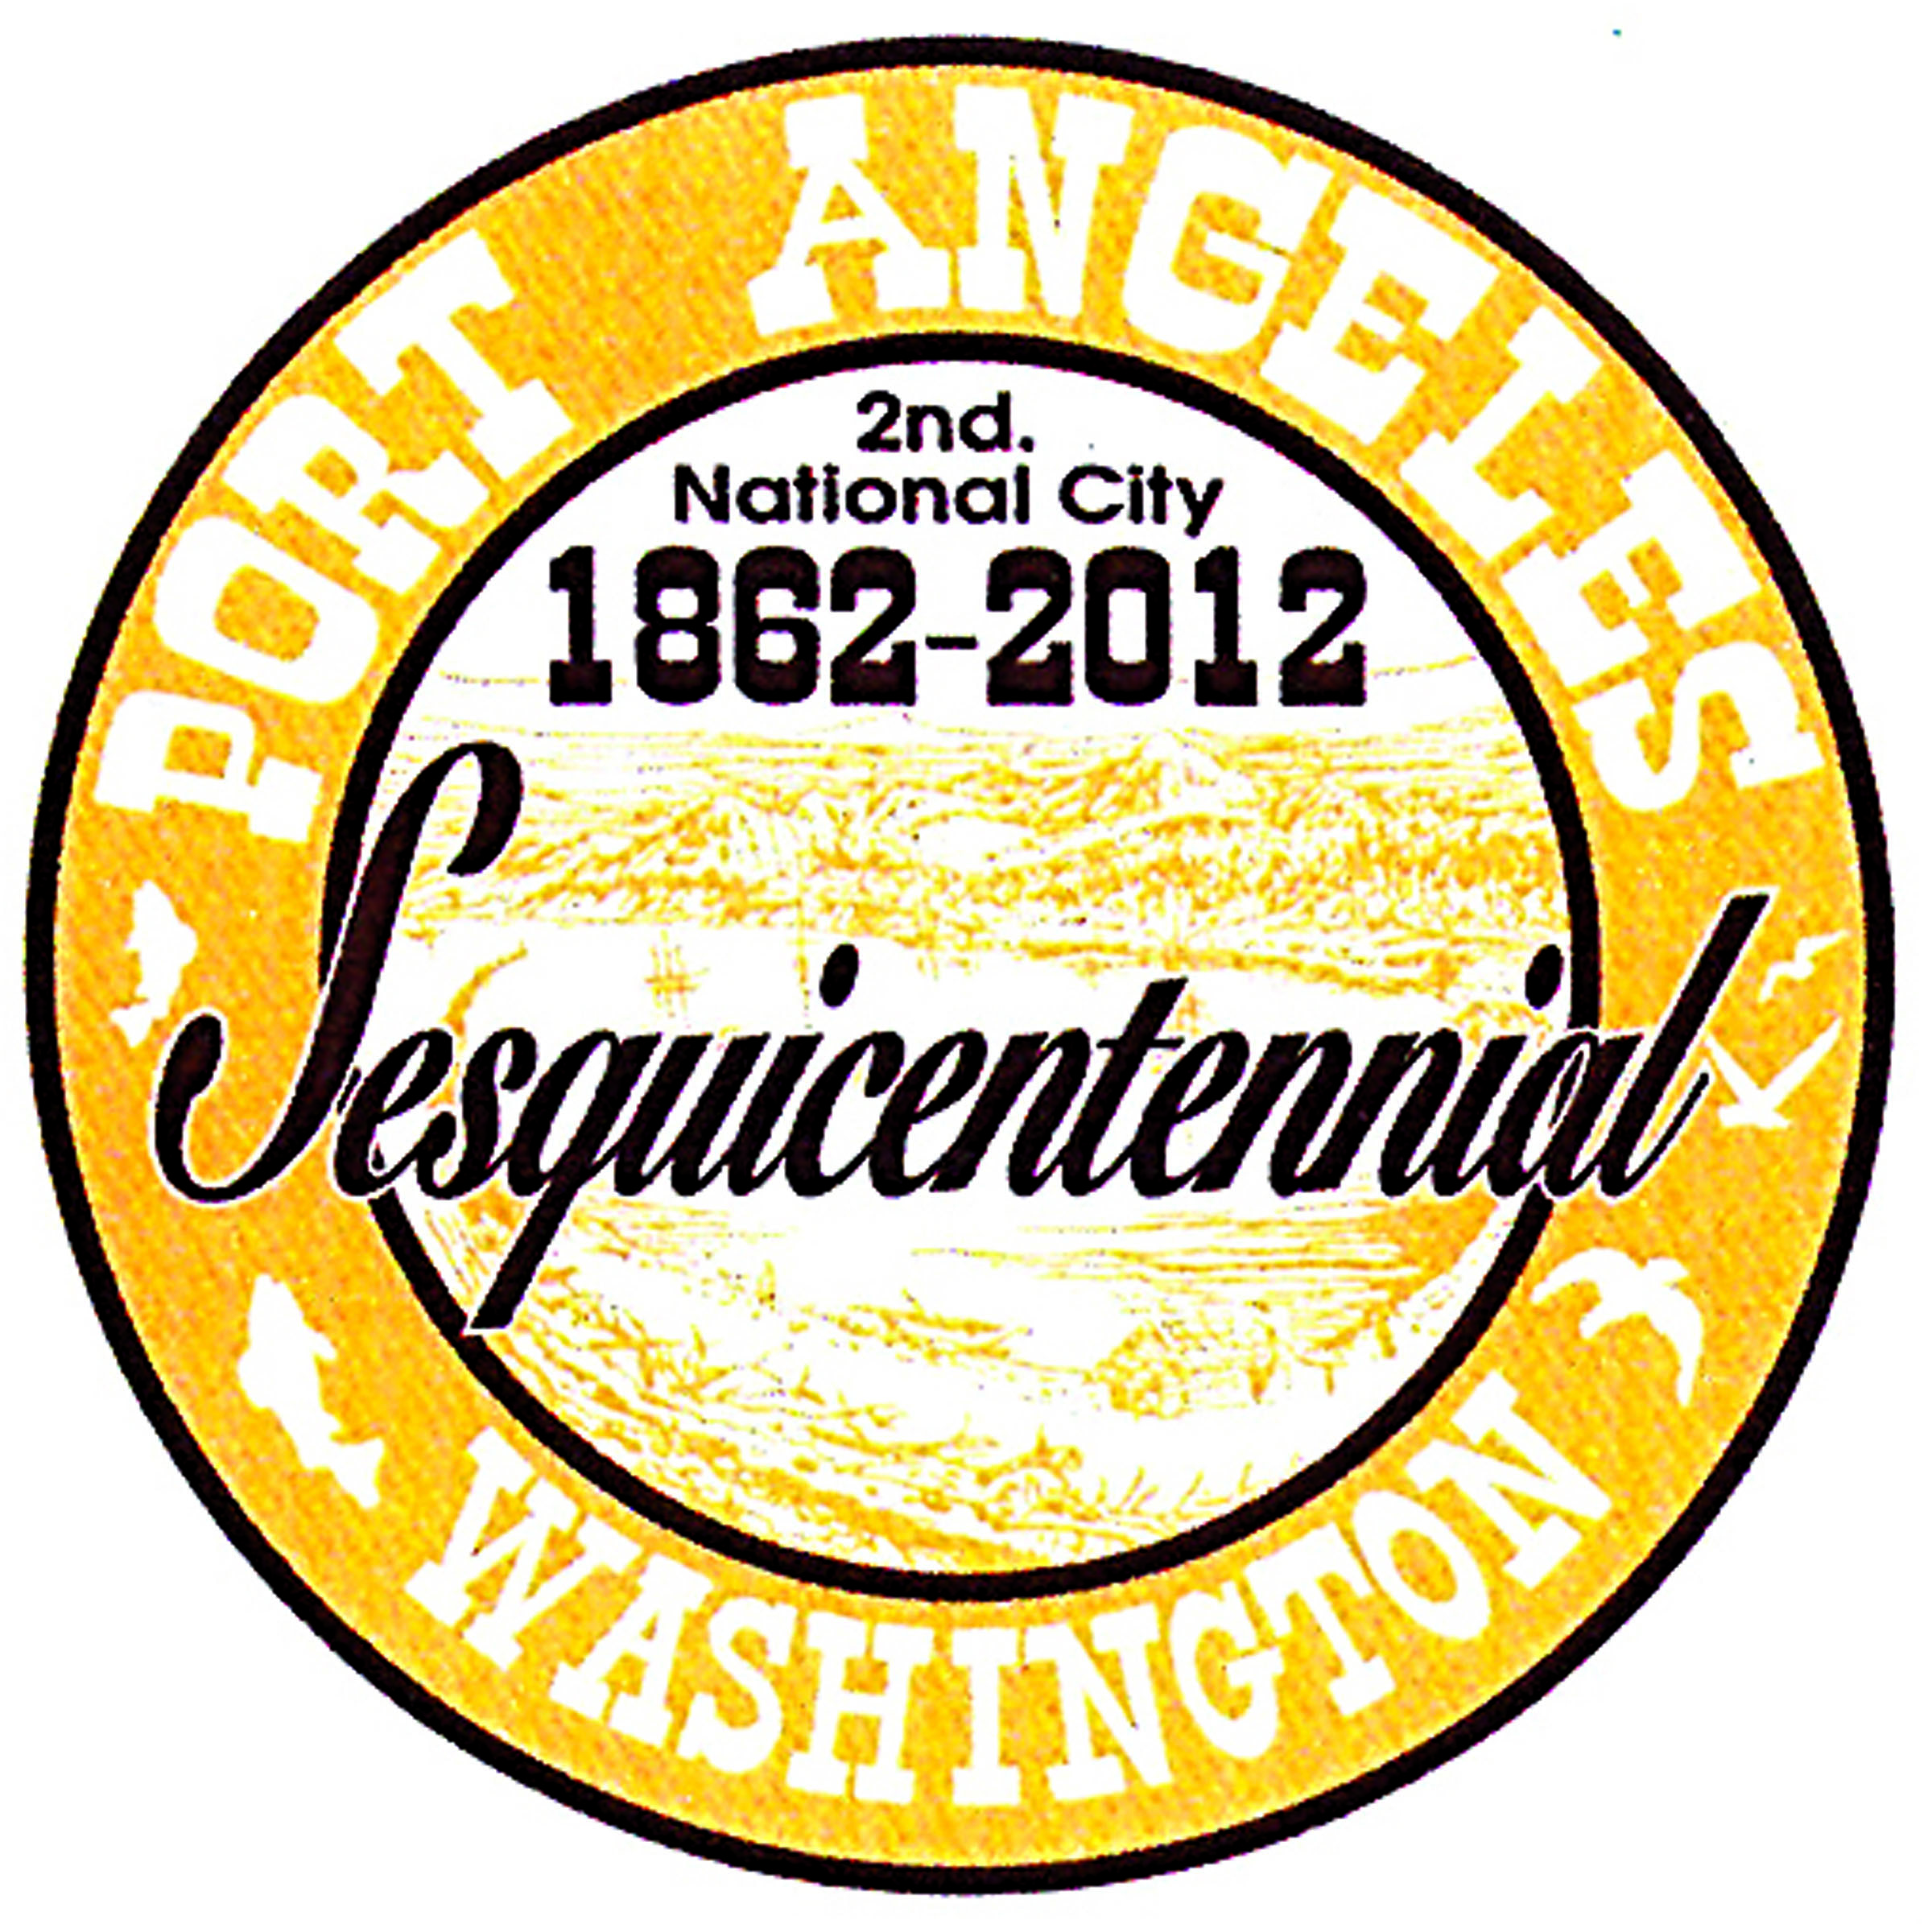 Happy 150th birthday today, Port Angeles! Come to the sesquicentennial event at the Museum at the Carnegie at high noon